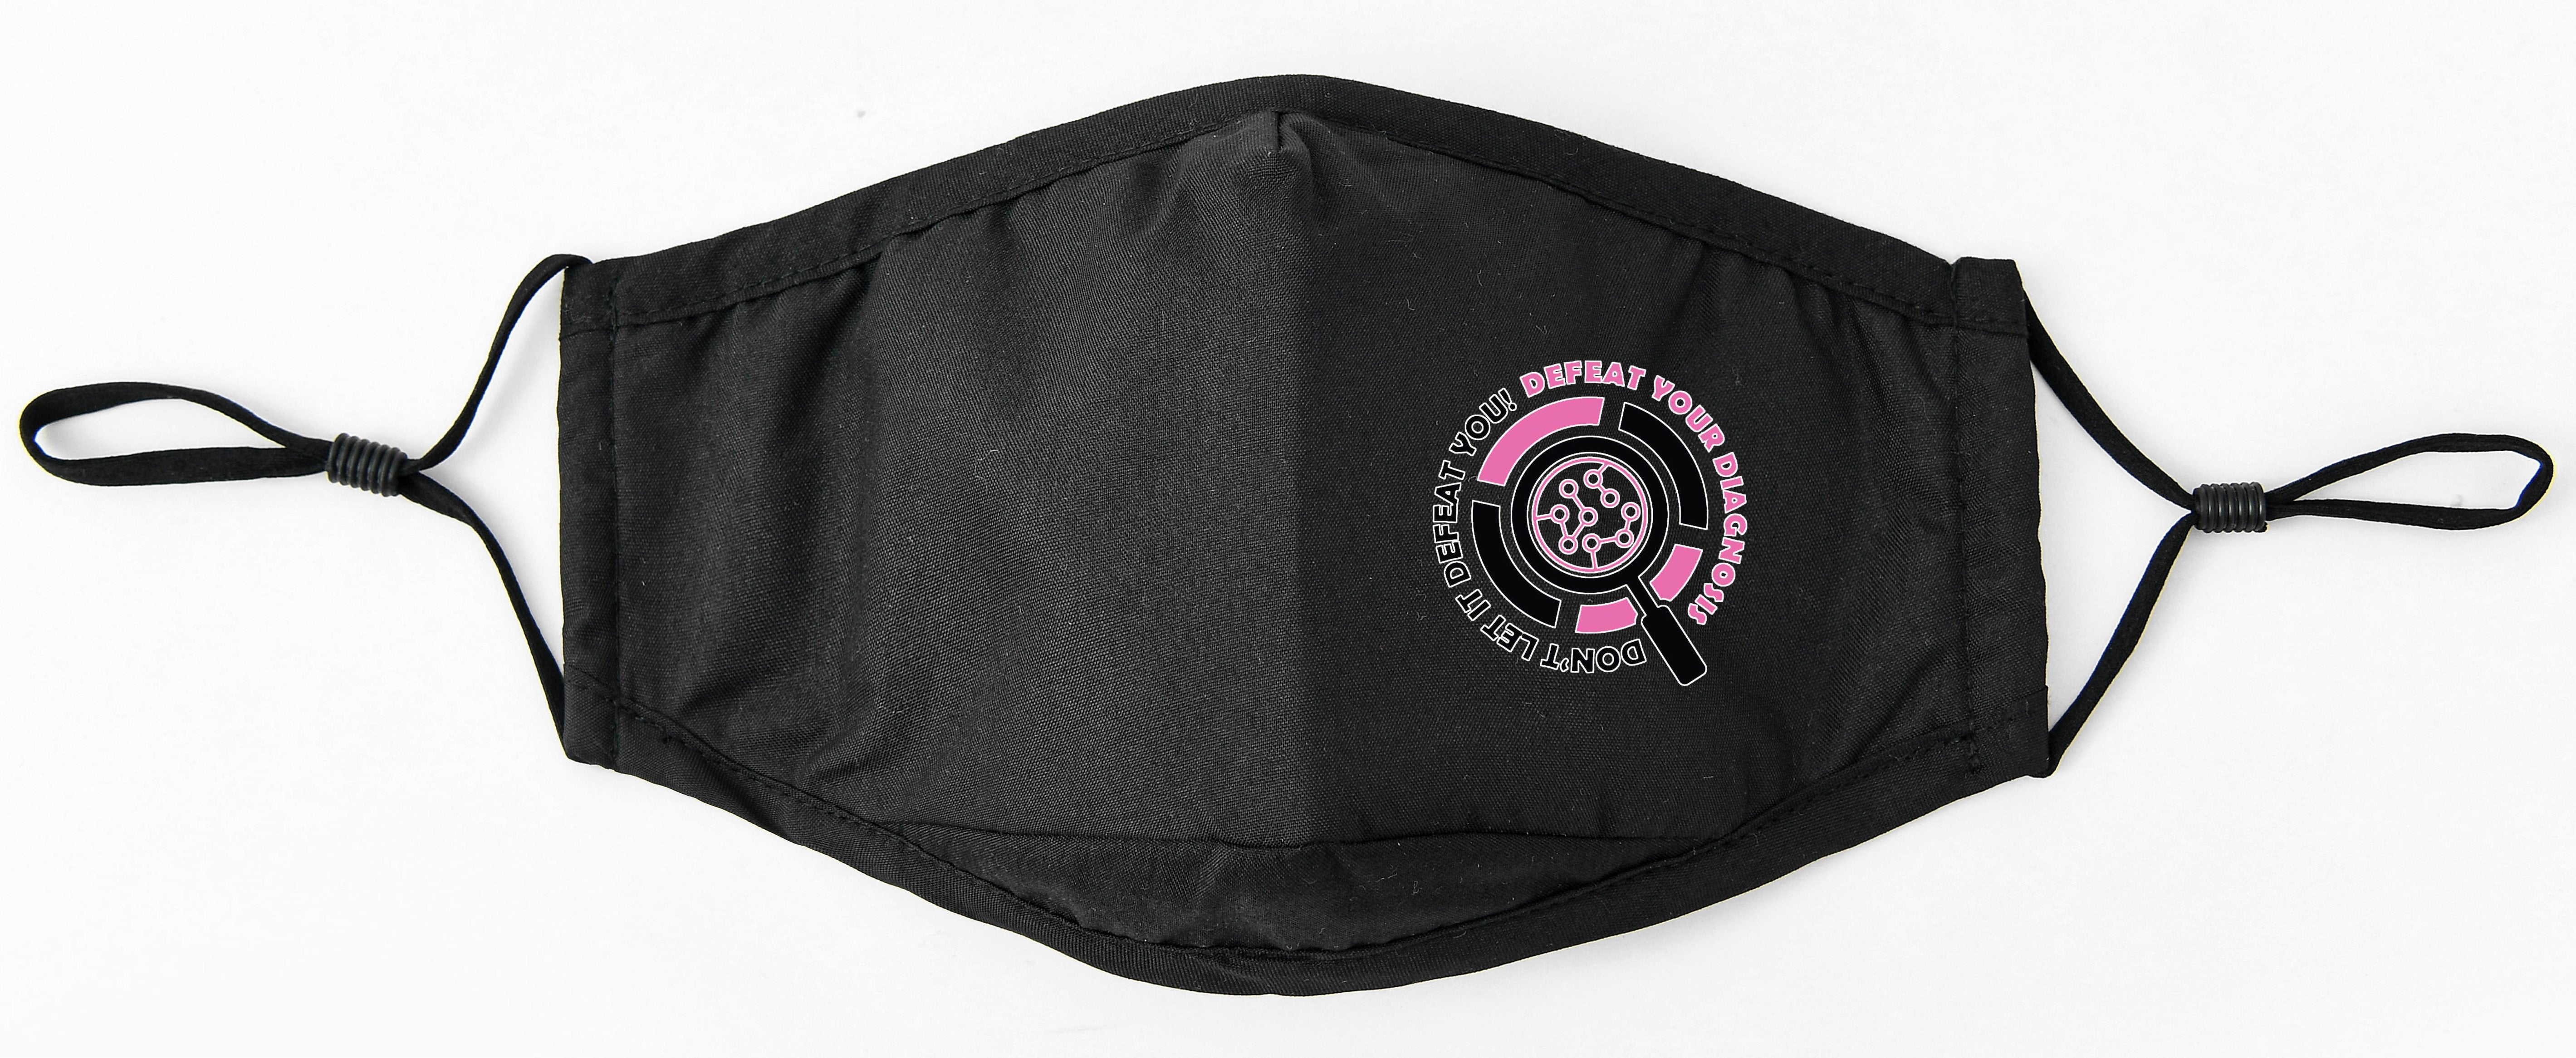 Defeat Your Diagnosis Circle logo face Mask with adjustable straps